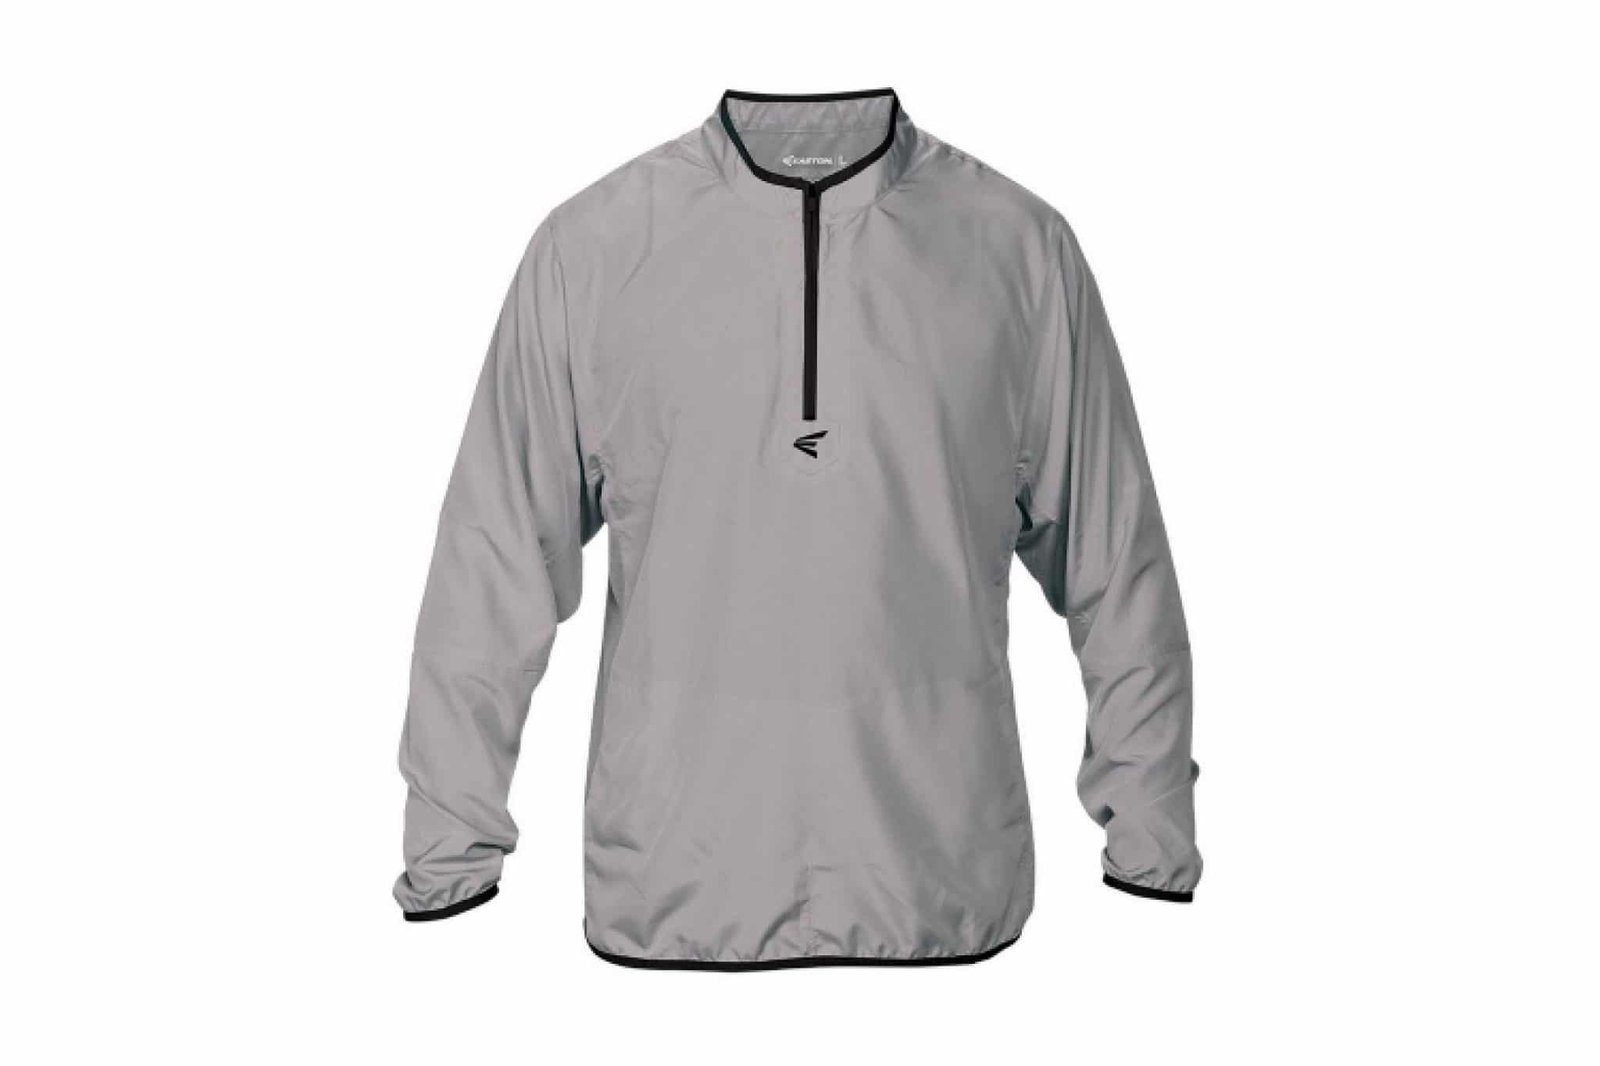 Performance under any Circumstance: The 8 Best Batting Practice Jacket